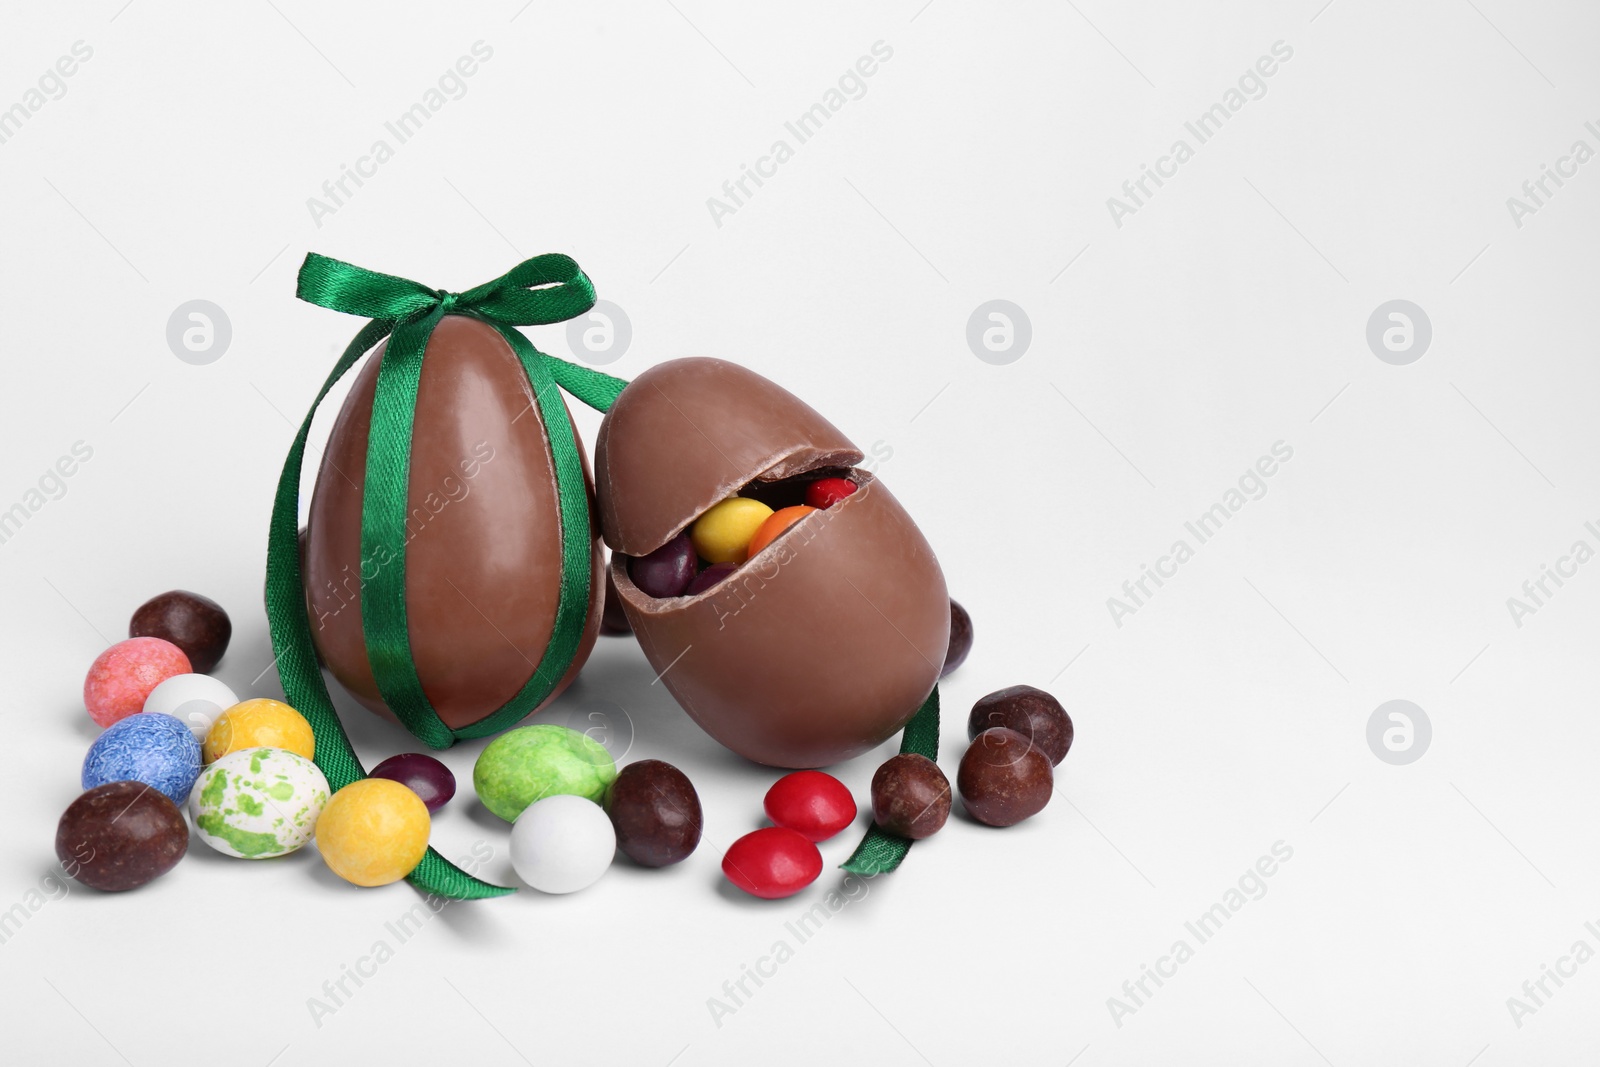 Photo of Tasty chocolate eggs and colorful candies on light background, space for text